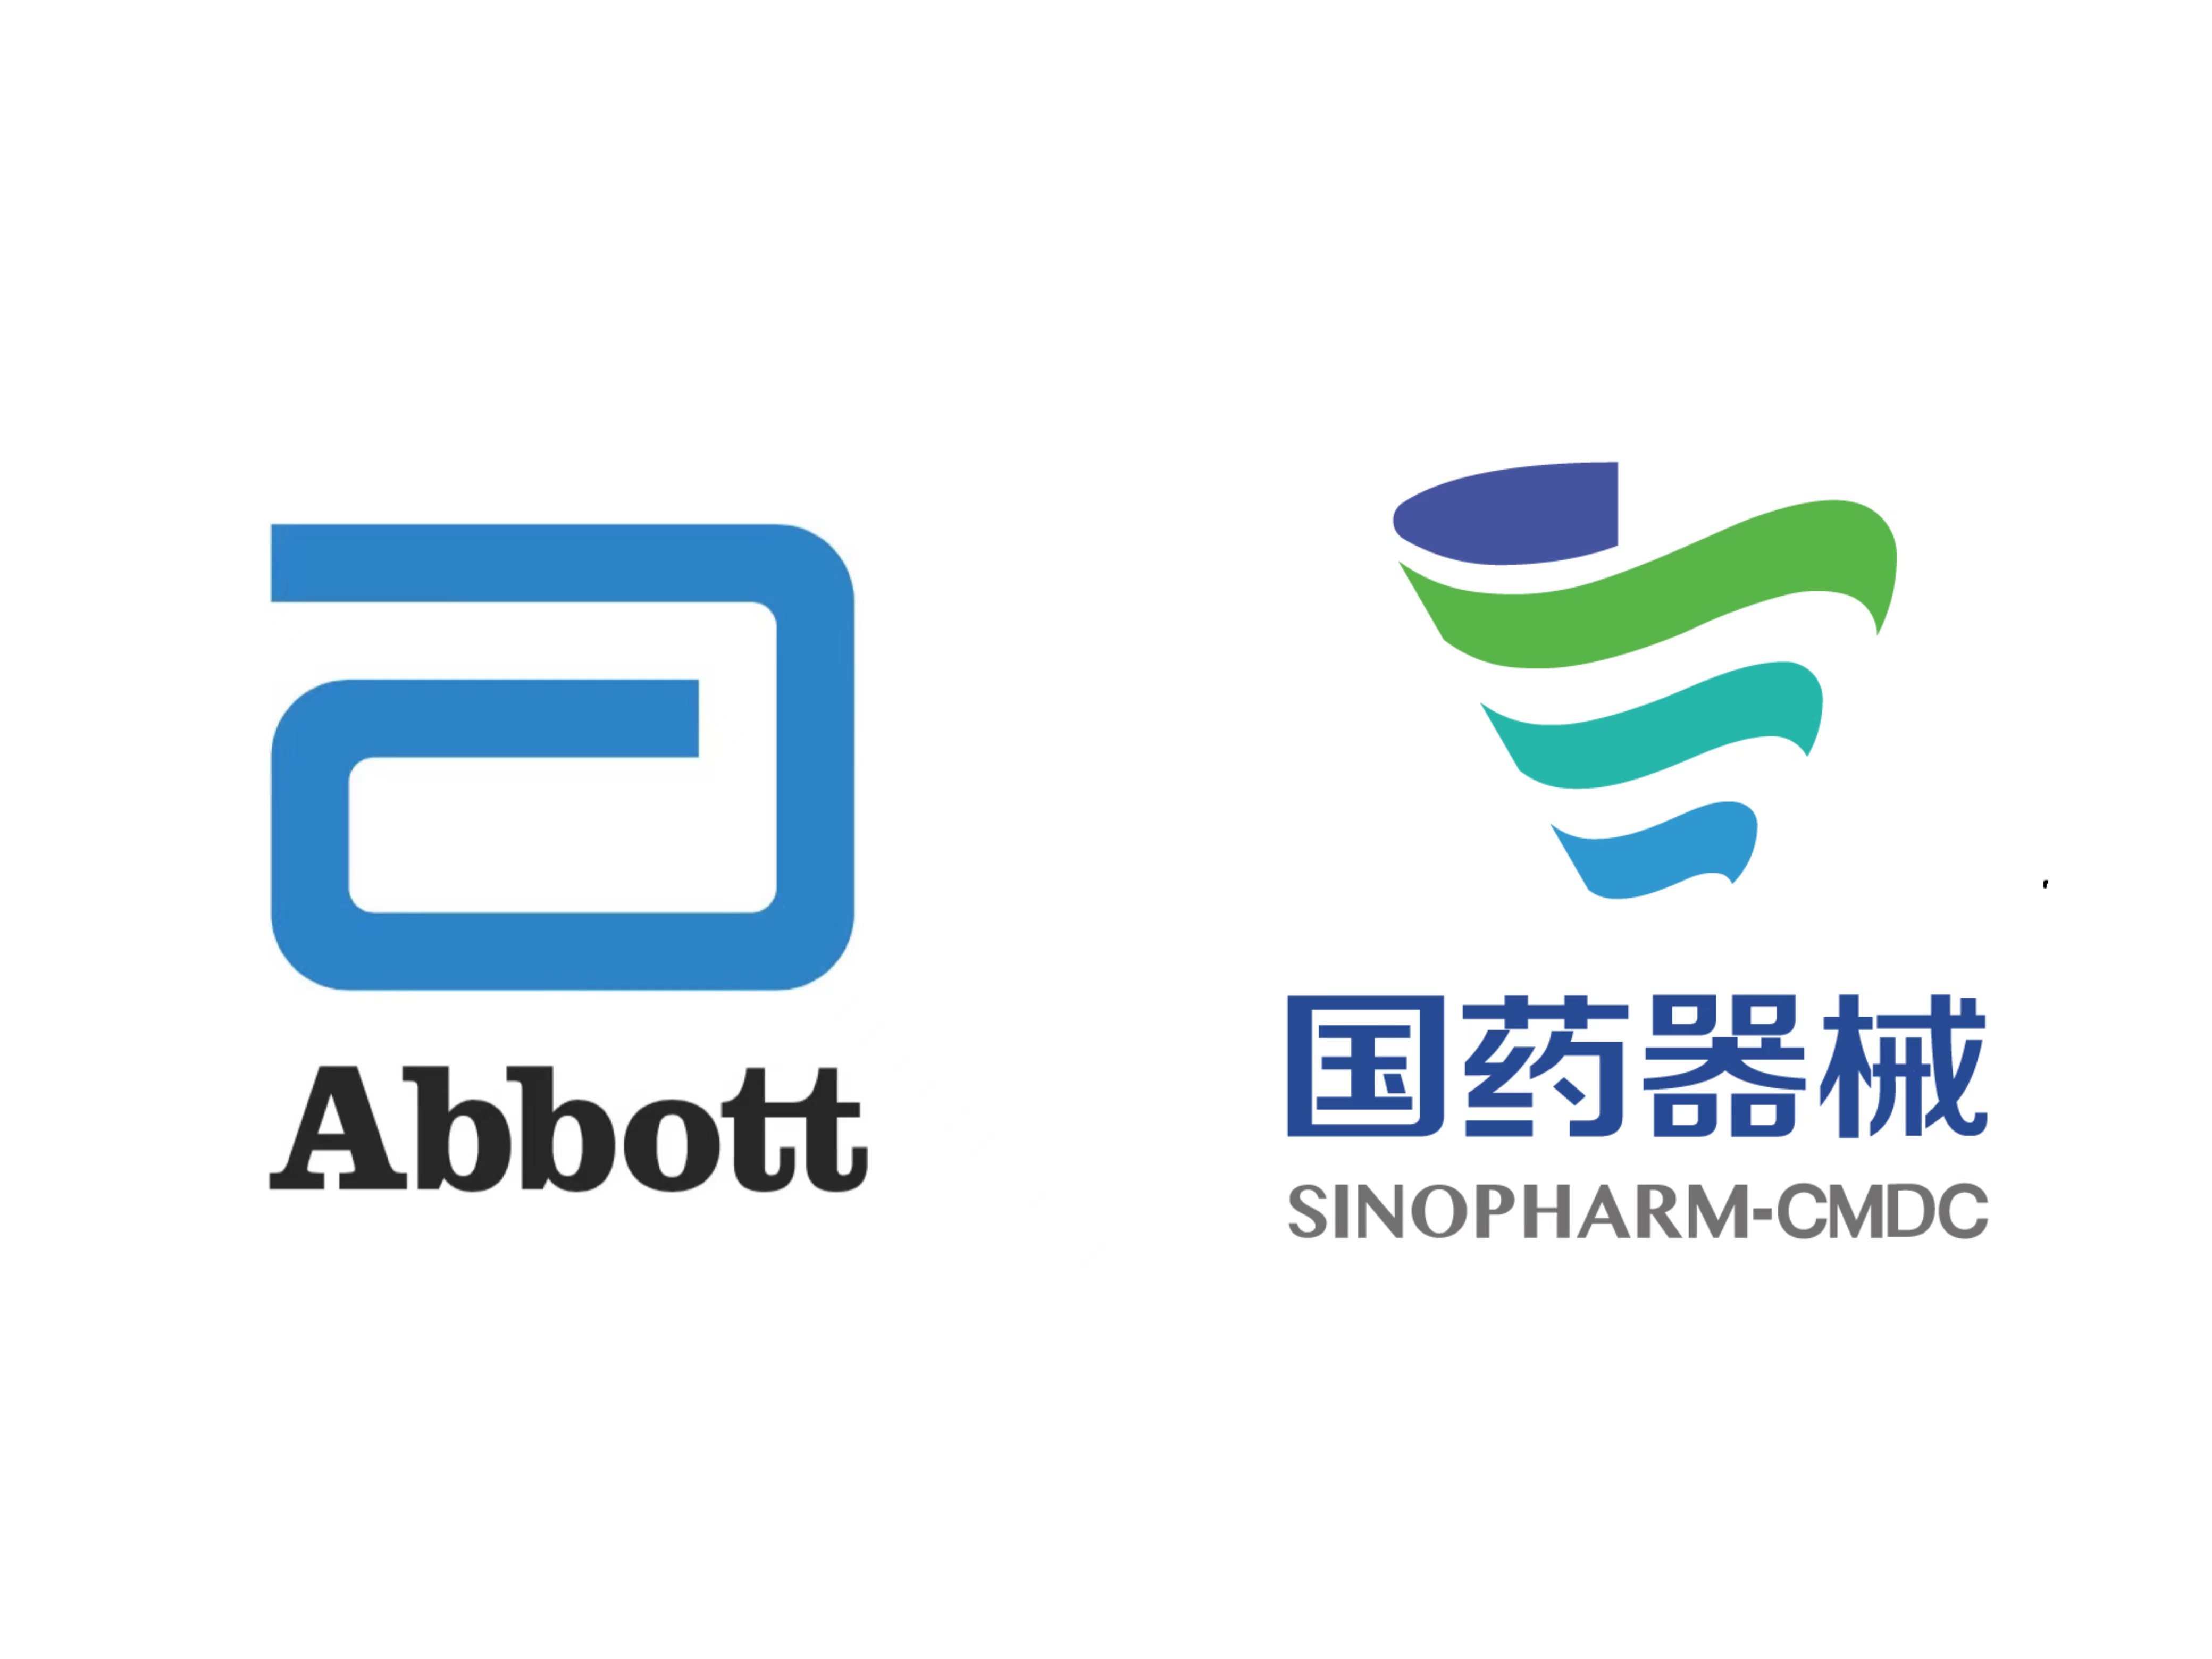 Abbott signed a strategic cooperation agreement with Sinopharm